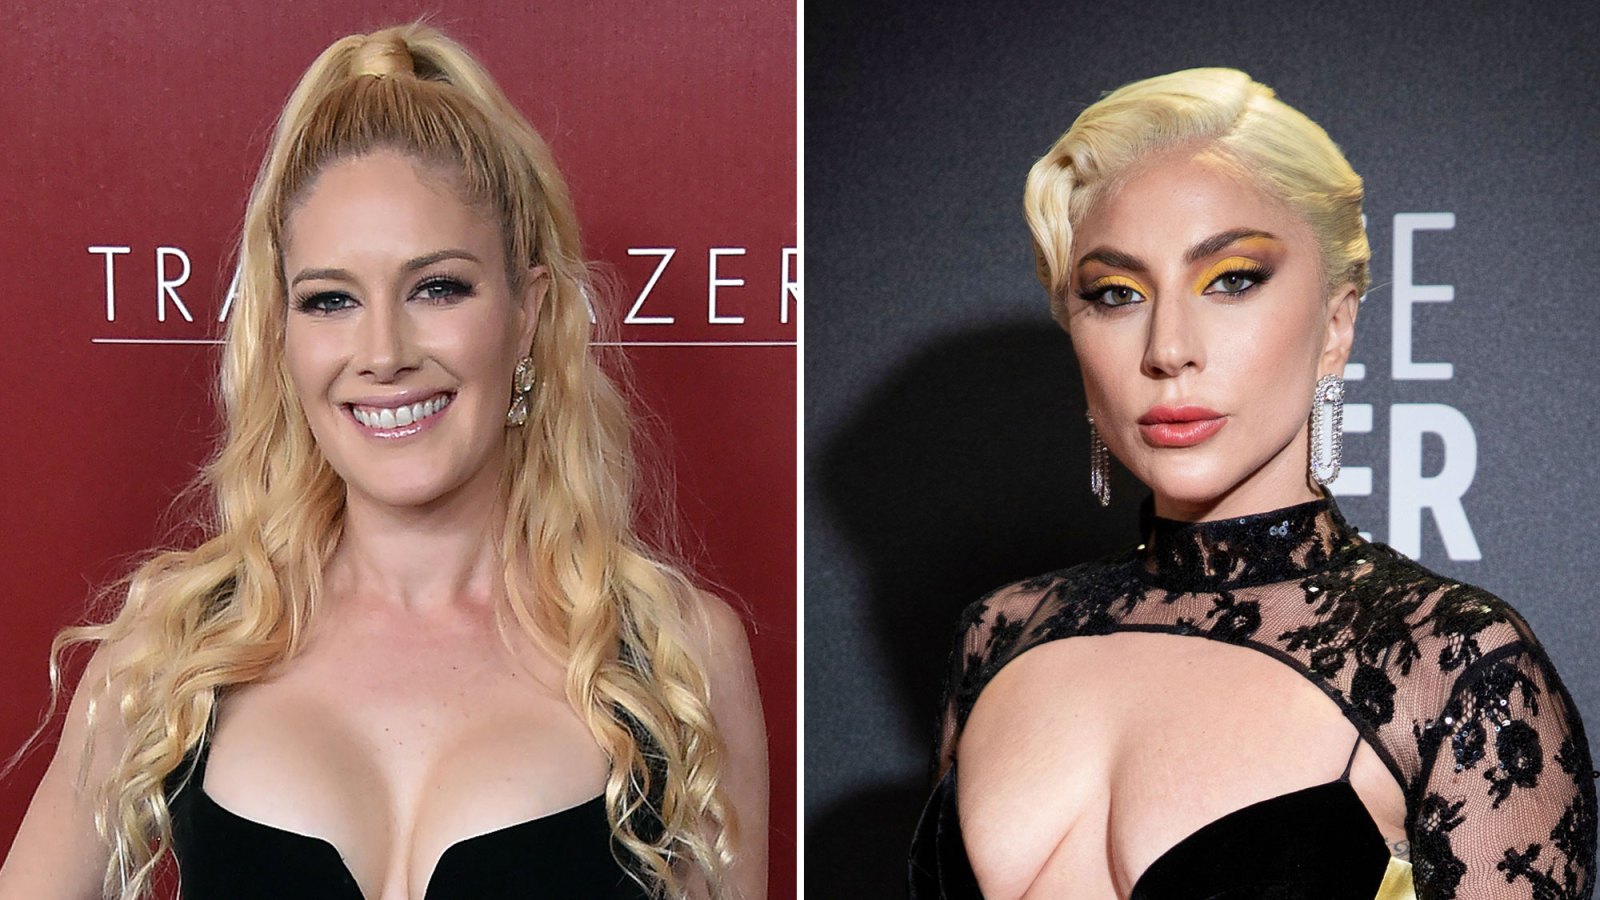 Heidi Montag Claims Lady Gaga Interfered With Her Music Career